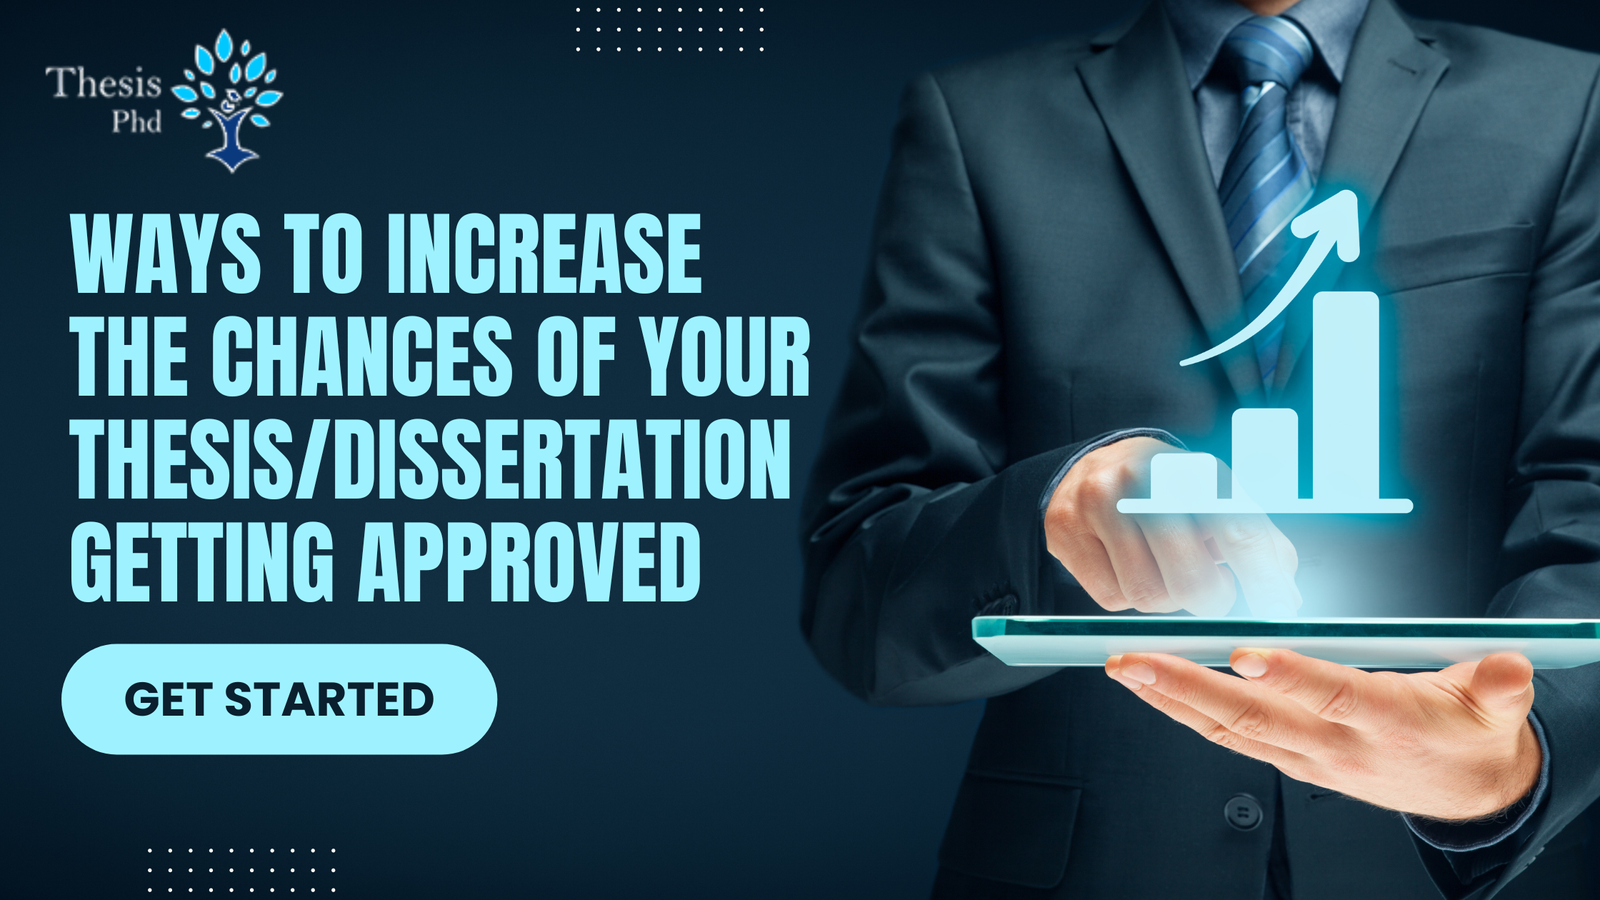 Ways To Increase the Chances of Your ThesisDissertation Getting Approved